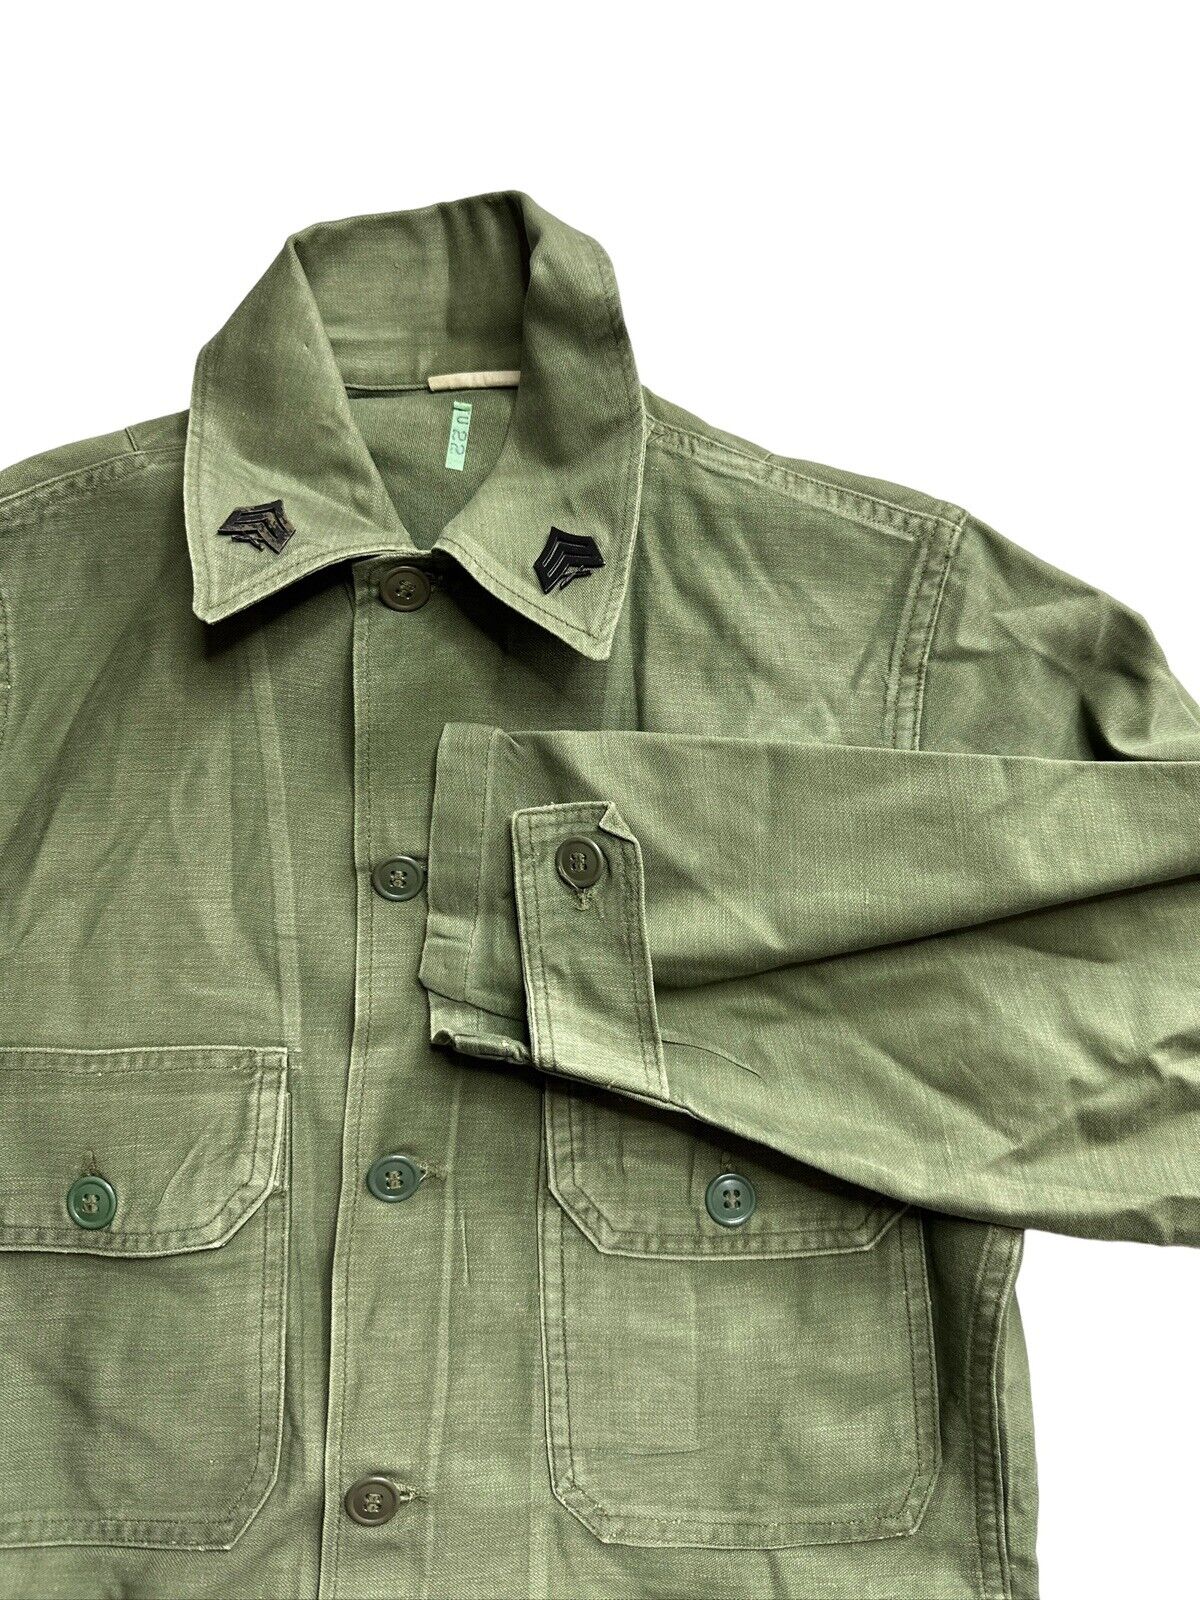 VTG US ARMY VIETNAM OG-107 Utility Shirt- 1964 60s Small Button Up